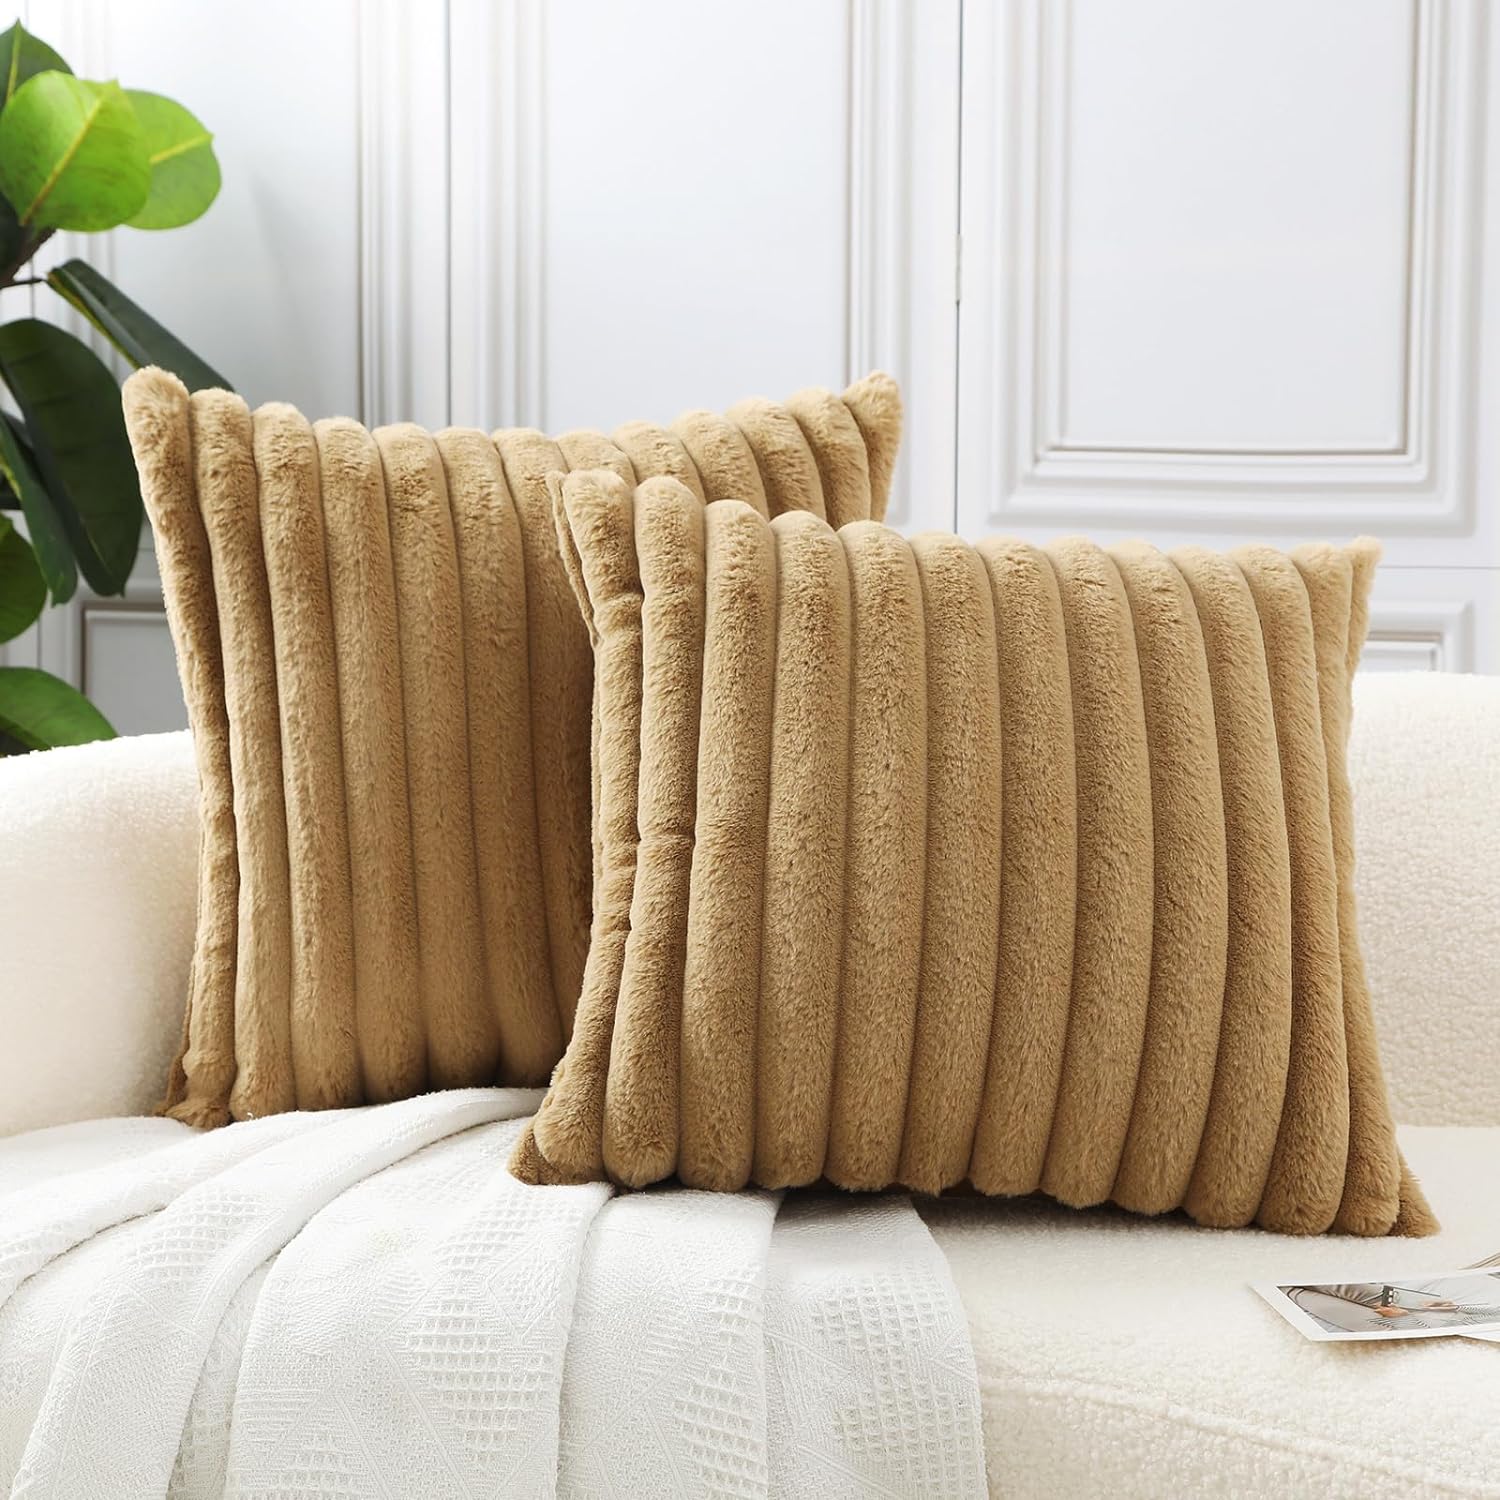 HPUK Faux Fur Plush Striped Throw Pillow Covers 18x18 Inch, Decorative Fluffy Couch Pillow Covers for Living Room, Accent Cozy and Fuzzy Pillow Covers for Couch, Sofa, and Bedroom(Light Brown)